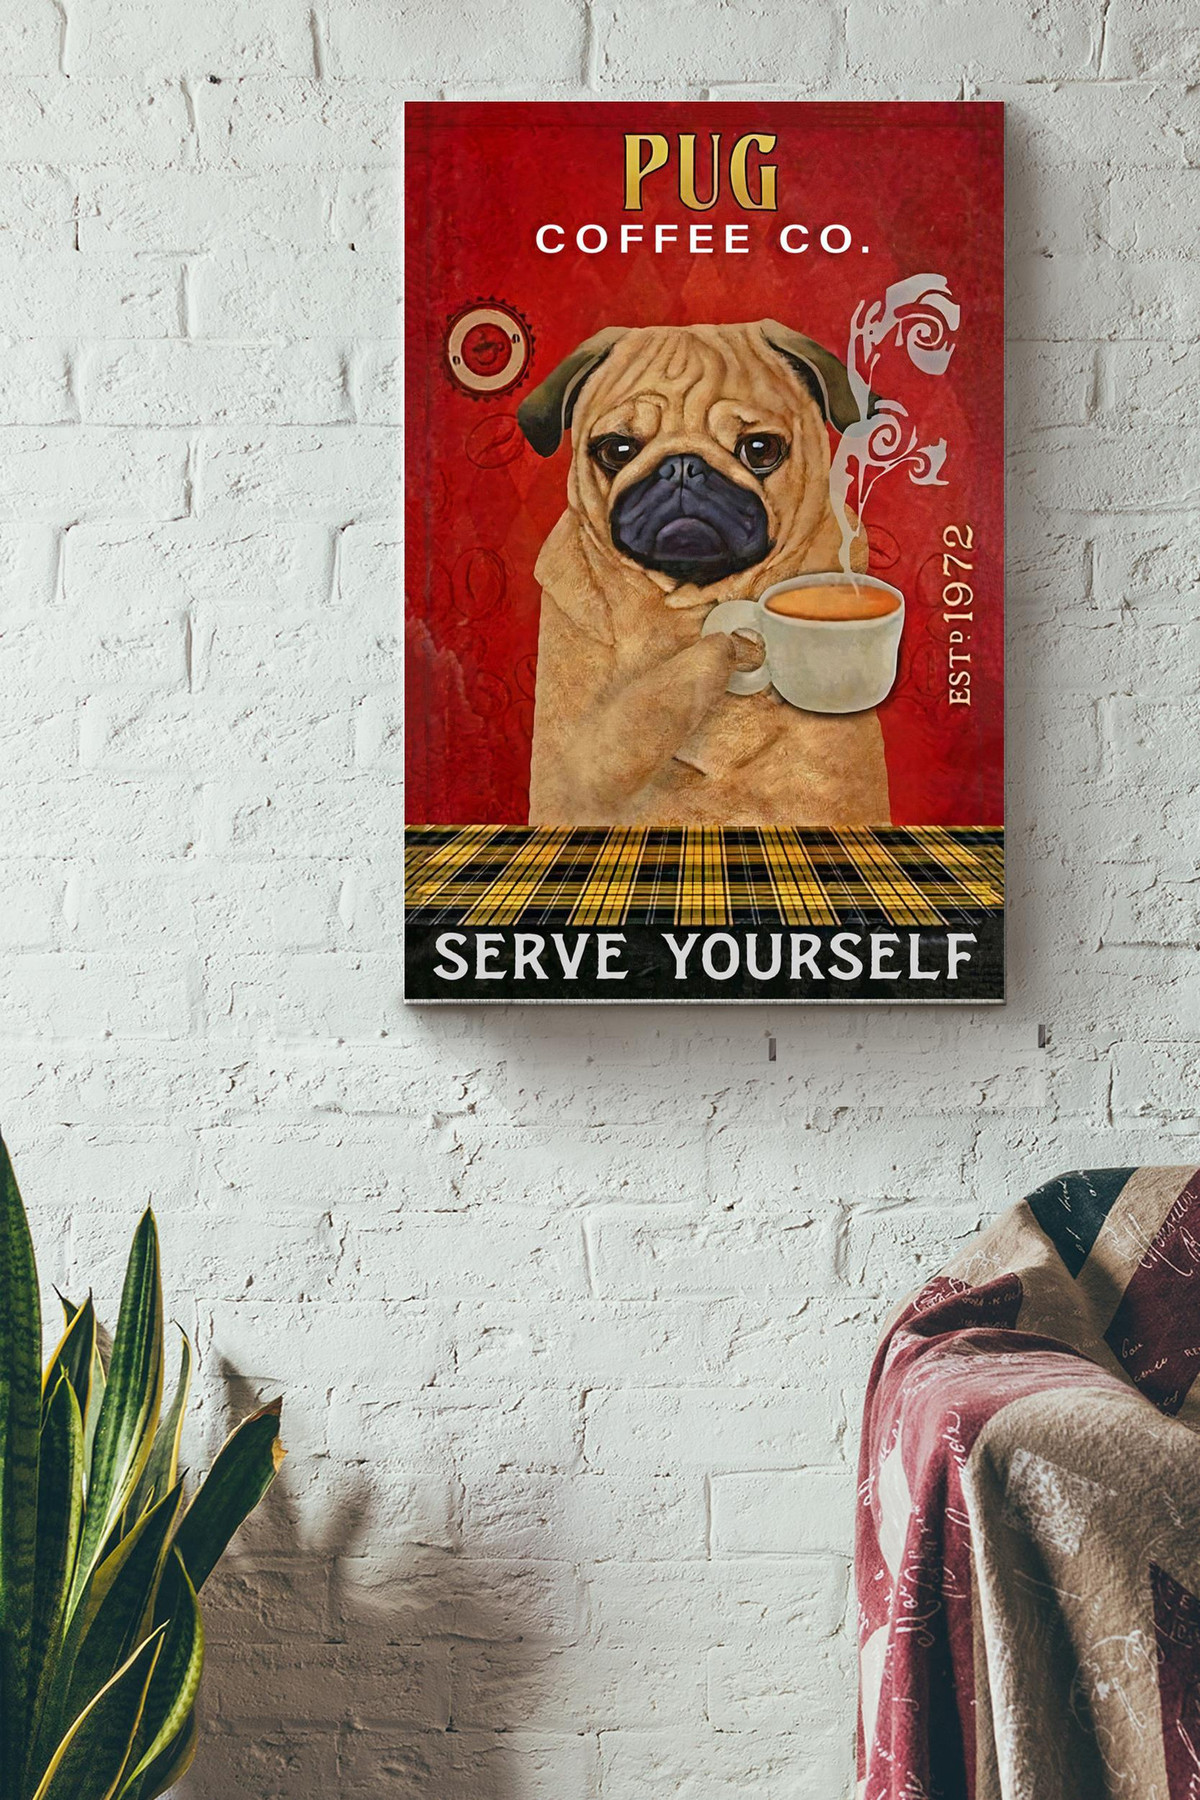 Coffee Company Pug Print Canvas Framed Canvas Sign Anniversary Birthday Christmas Housewarming Gift Home Canvas Gallery Painting Wrapped Canvas Framed Prints, Canvas Paintings Wrapped Canvas 8x10